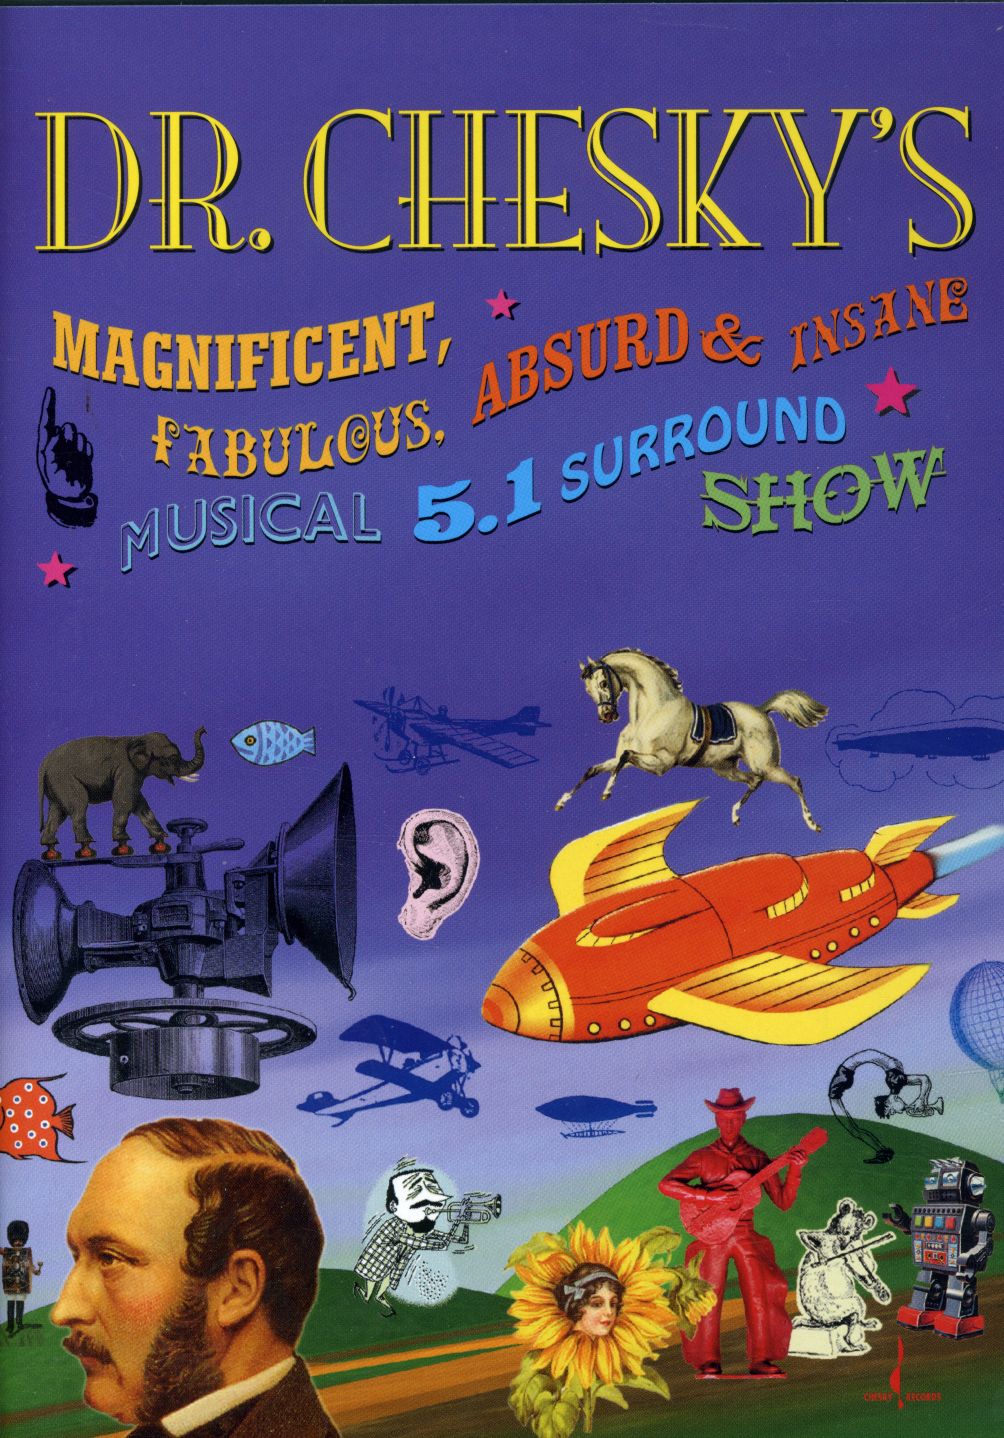 DR CHESKY'S MAGNIFICENT FABULOUS ABSURD MUSICAL